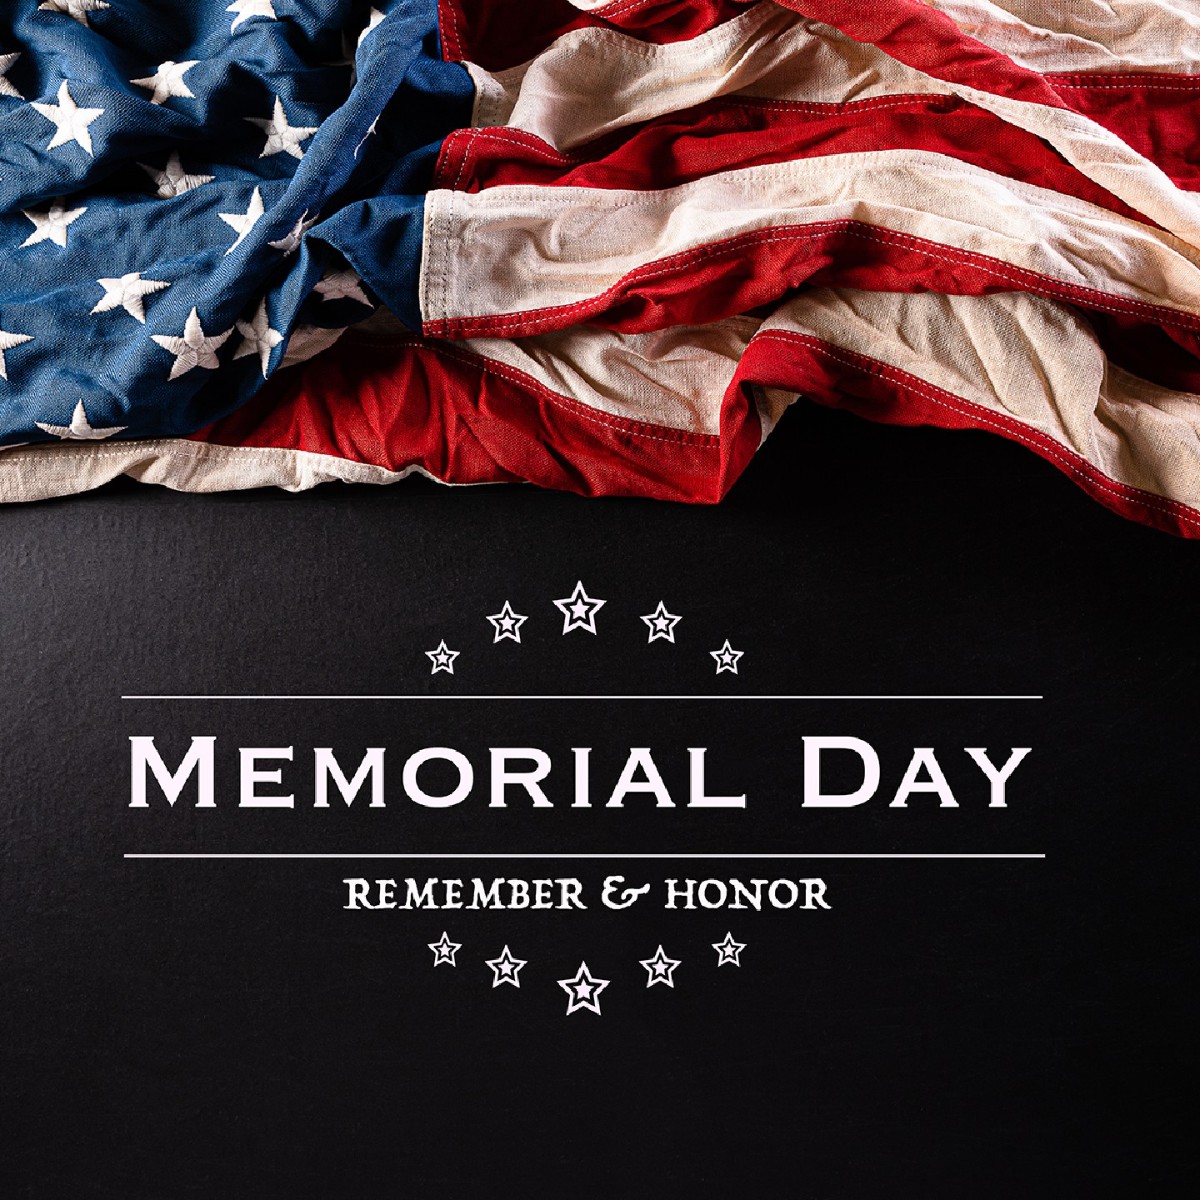 Today we honor and remember the brave men and women who have made the ultimate sacrifice for our country. As we enjoy the freedoms they fought to protect, let us take a moment to reflect on their courage, dedication and selflessness. 🇺🇸